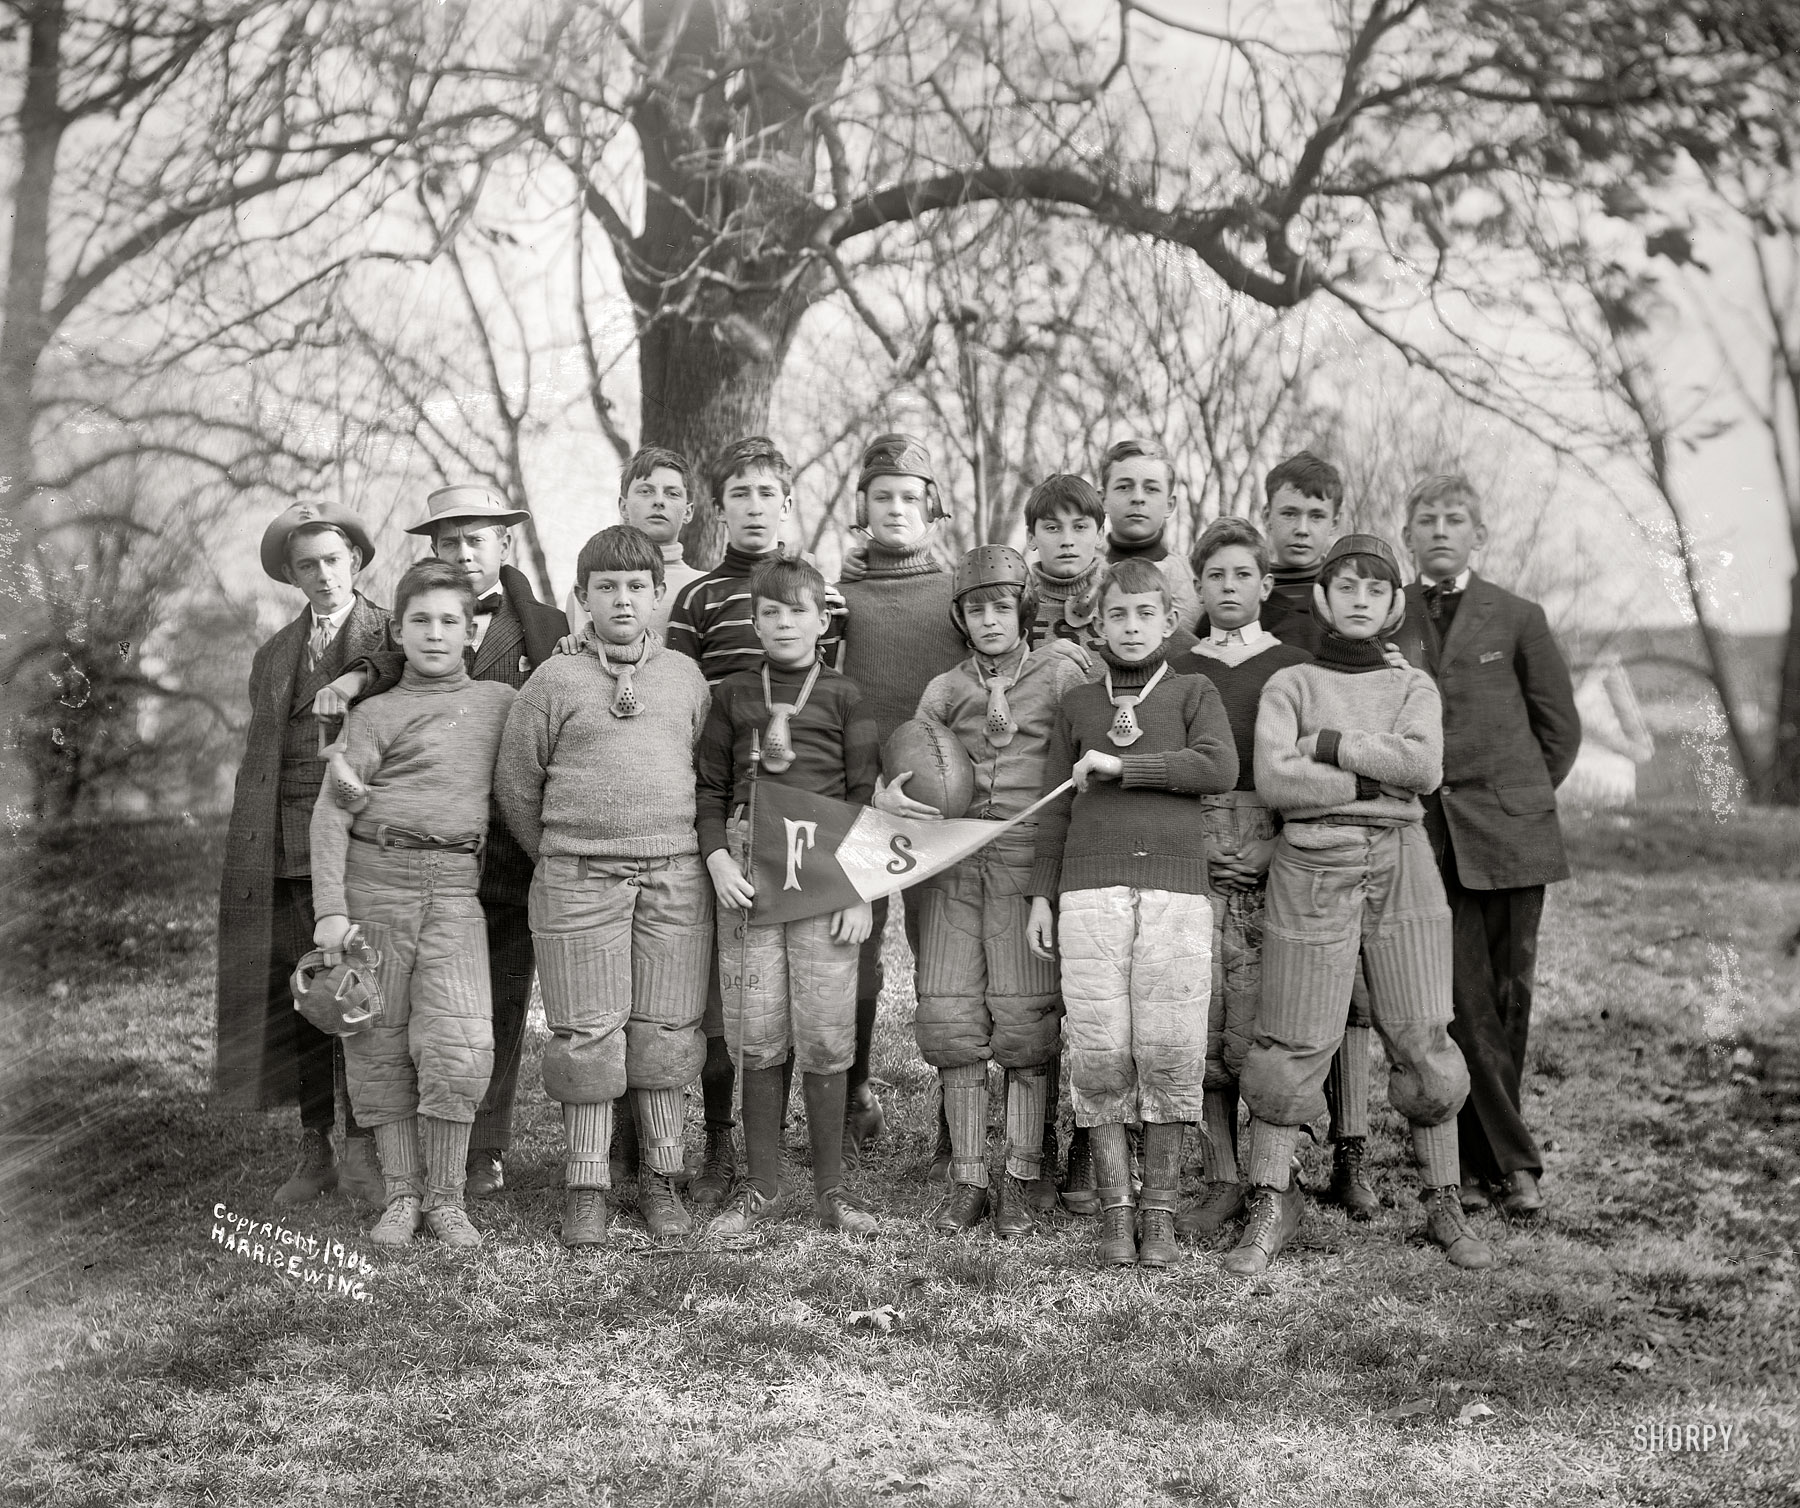 1906. "Friends School football." Junior varsity team at the Sidwell Friends School in Washington, D.C. Harris & Ewing Collection glass negative. View full size.